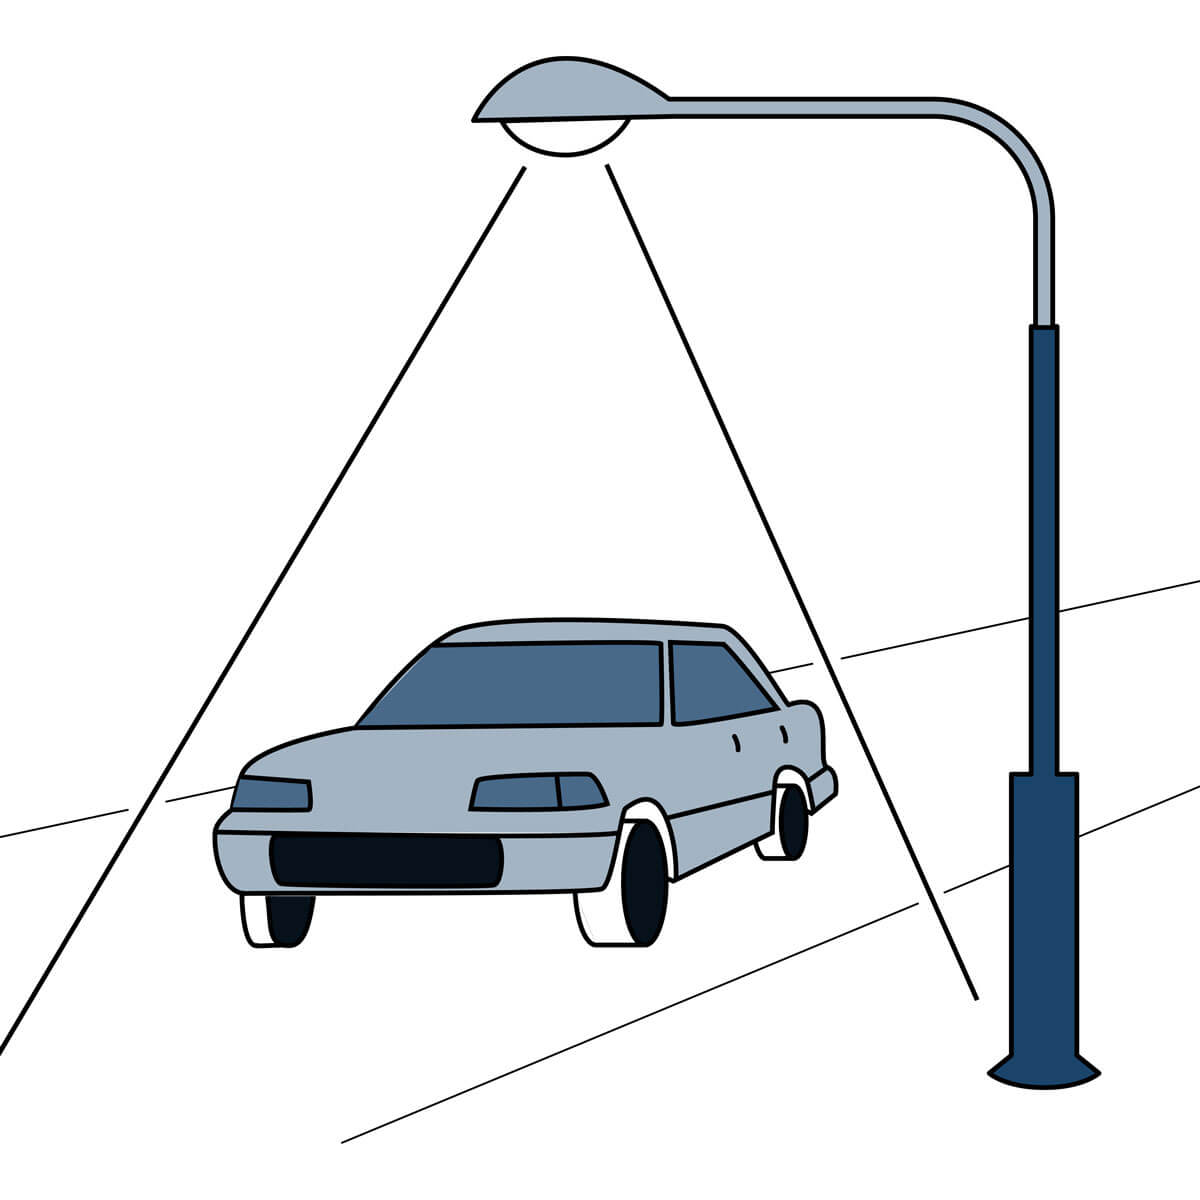 Illustration of a street light shining on a car driving down the street.